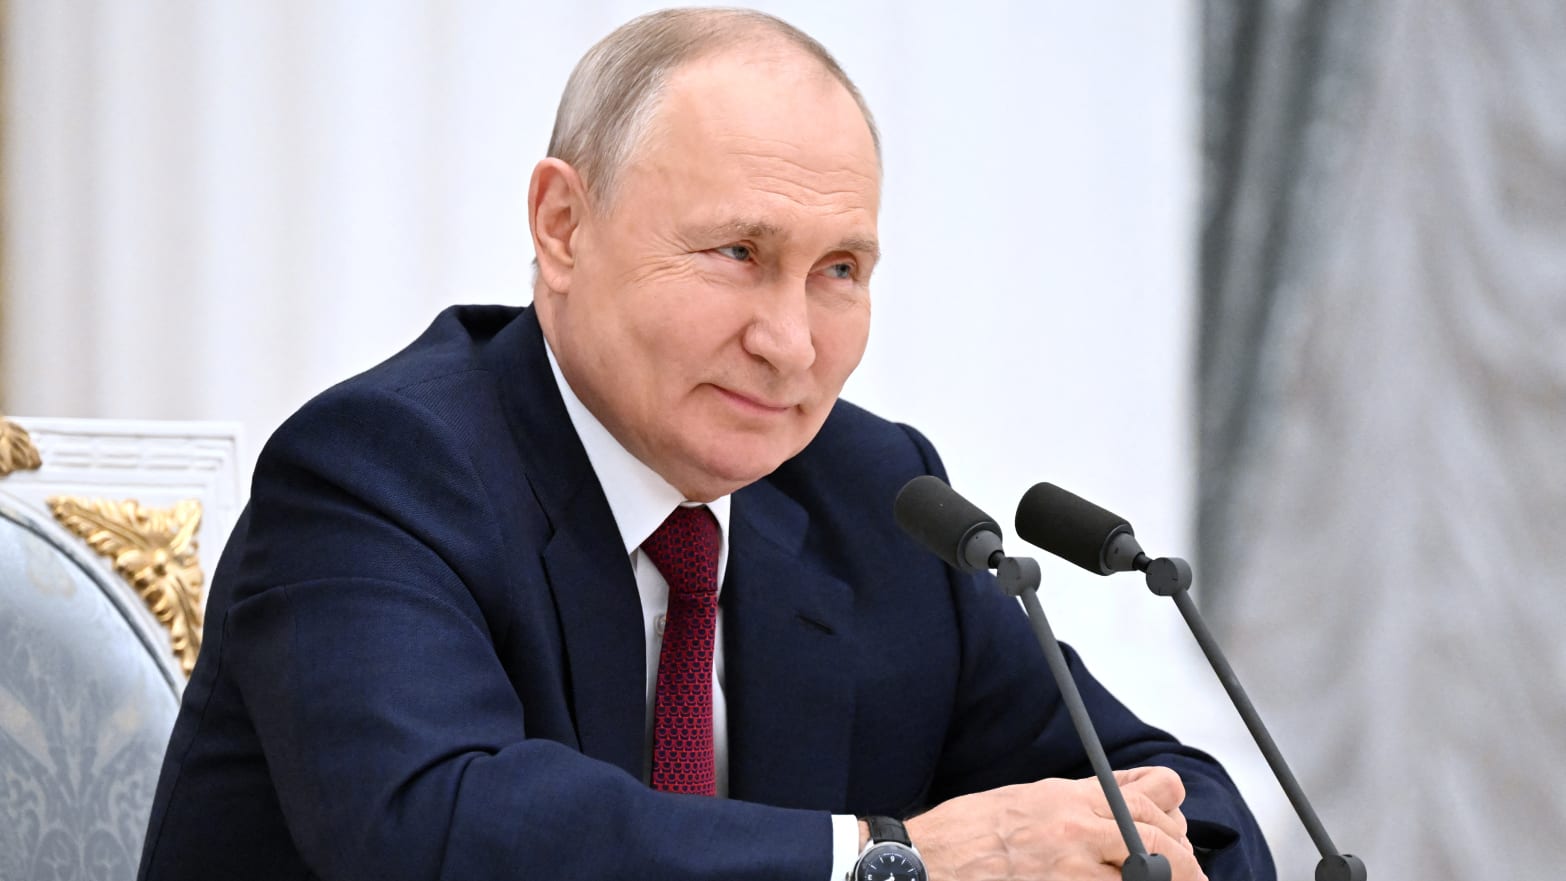 Vladimir Putin met with Wagner boss Yevgeny Prigozhin in the Kremlin five days after Wagner launched a mutiny against Russia’s military leadership.